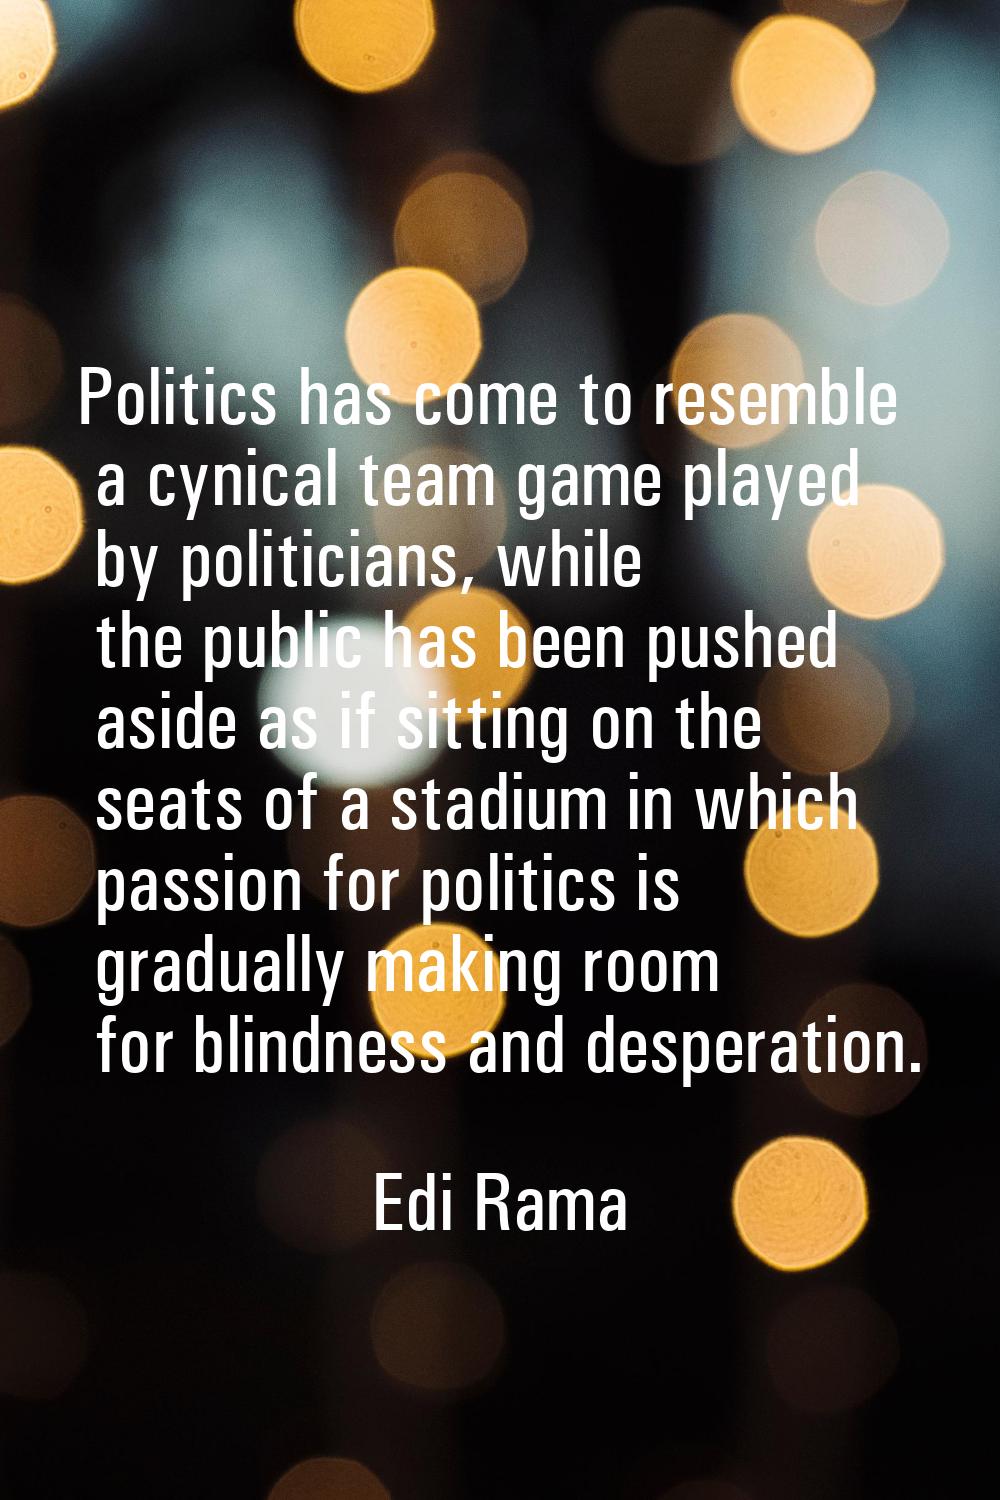 Politics has come to resemble a cynical team game played by politicians, while the public has been 